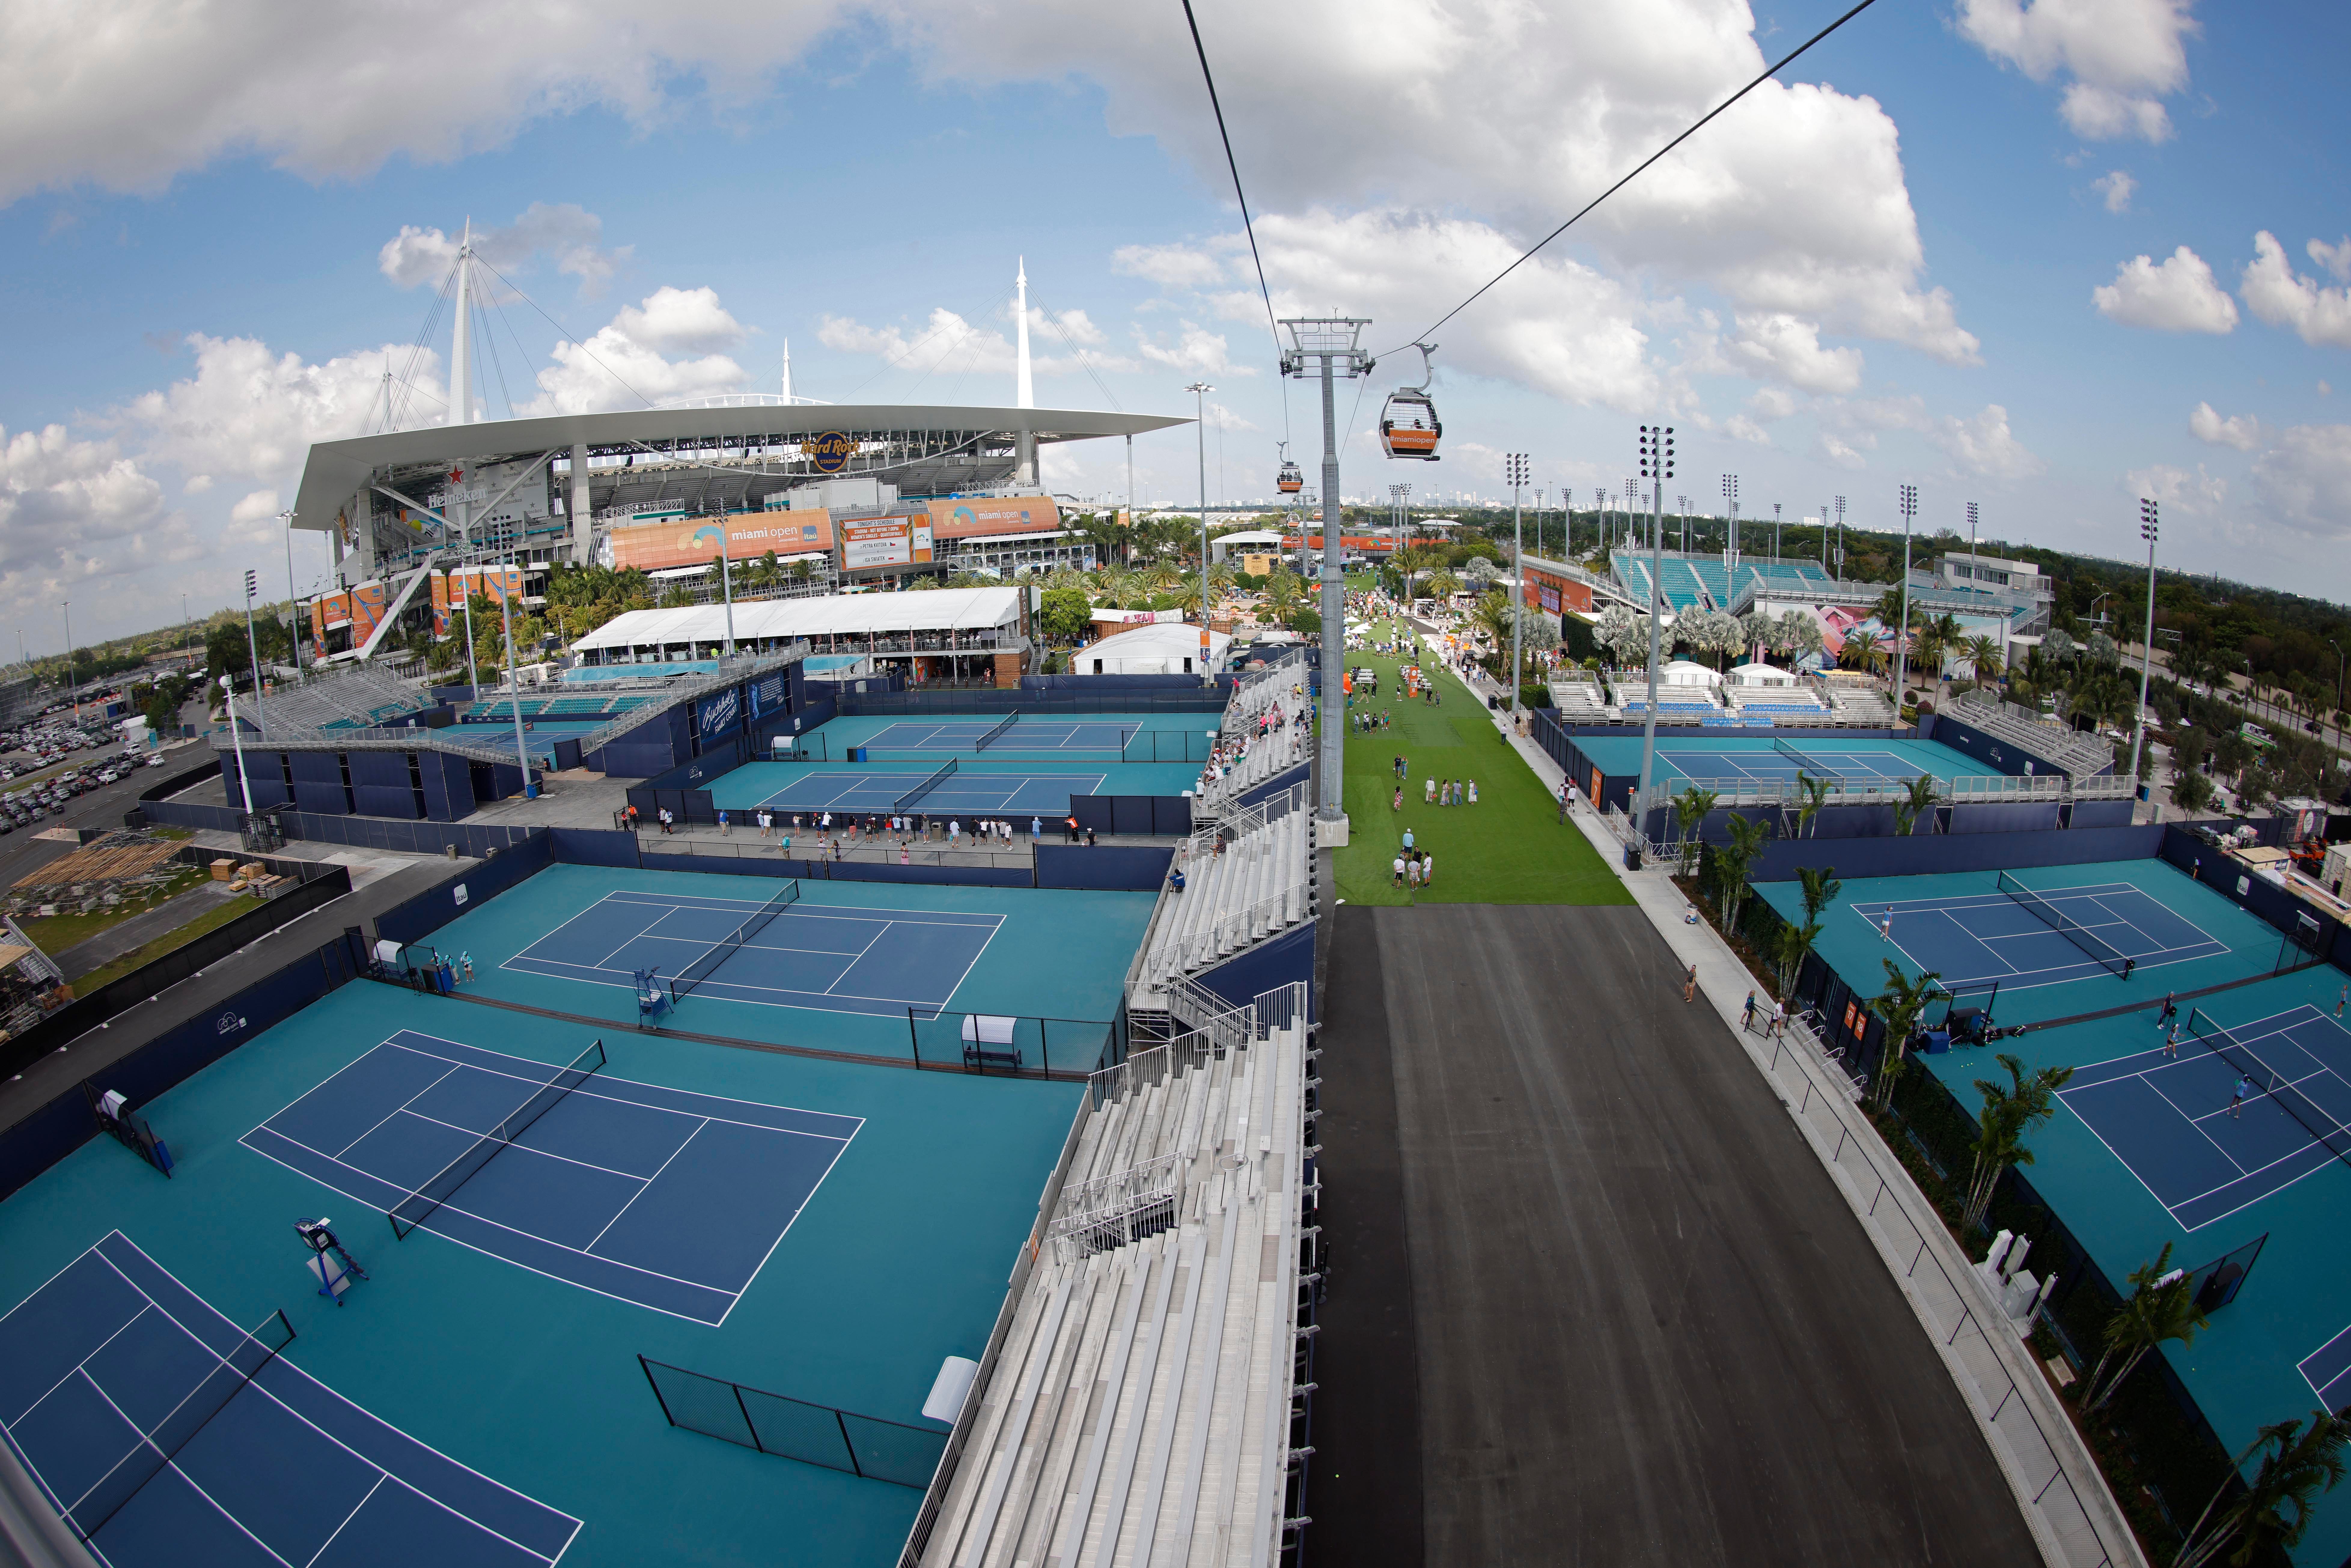 Mar 30, 2022; Miami Gardens, FL, USA; An overall view of the grounds and a portion of the circuit for the upcoming Formula 1 Miami Grand Prix running through the middle of the grounds at the Miami Open at Hard Rock Stadium. Mandatory Credit: Geoff Burke-USA TODAY Sports ORG XMIT: IMAGN-480861 ORIG FILE ID:  20220330_gkb_sb4_050.JPG